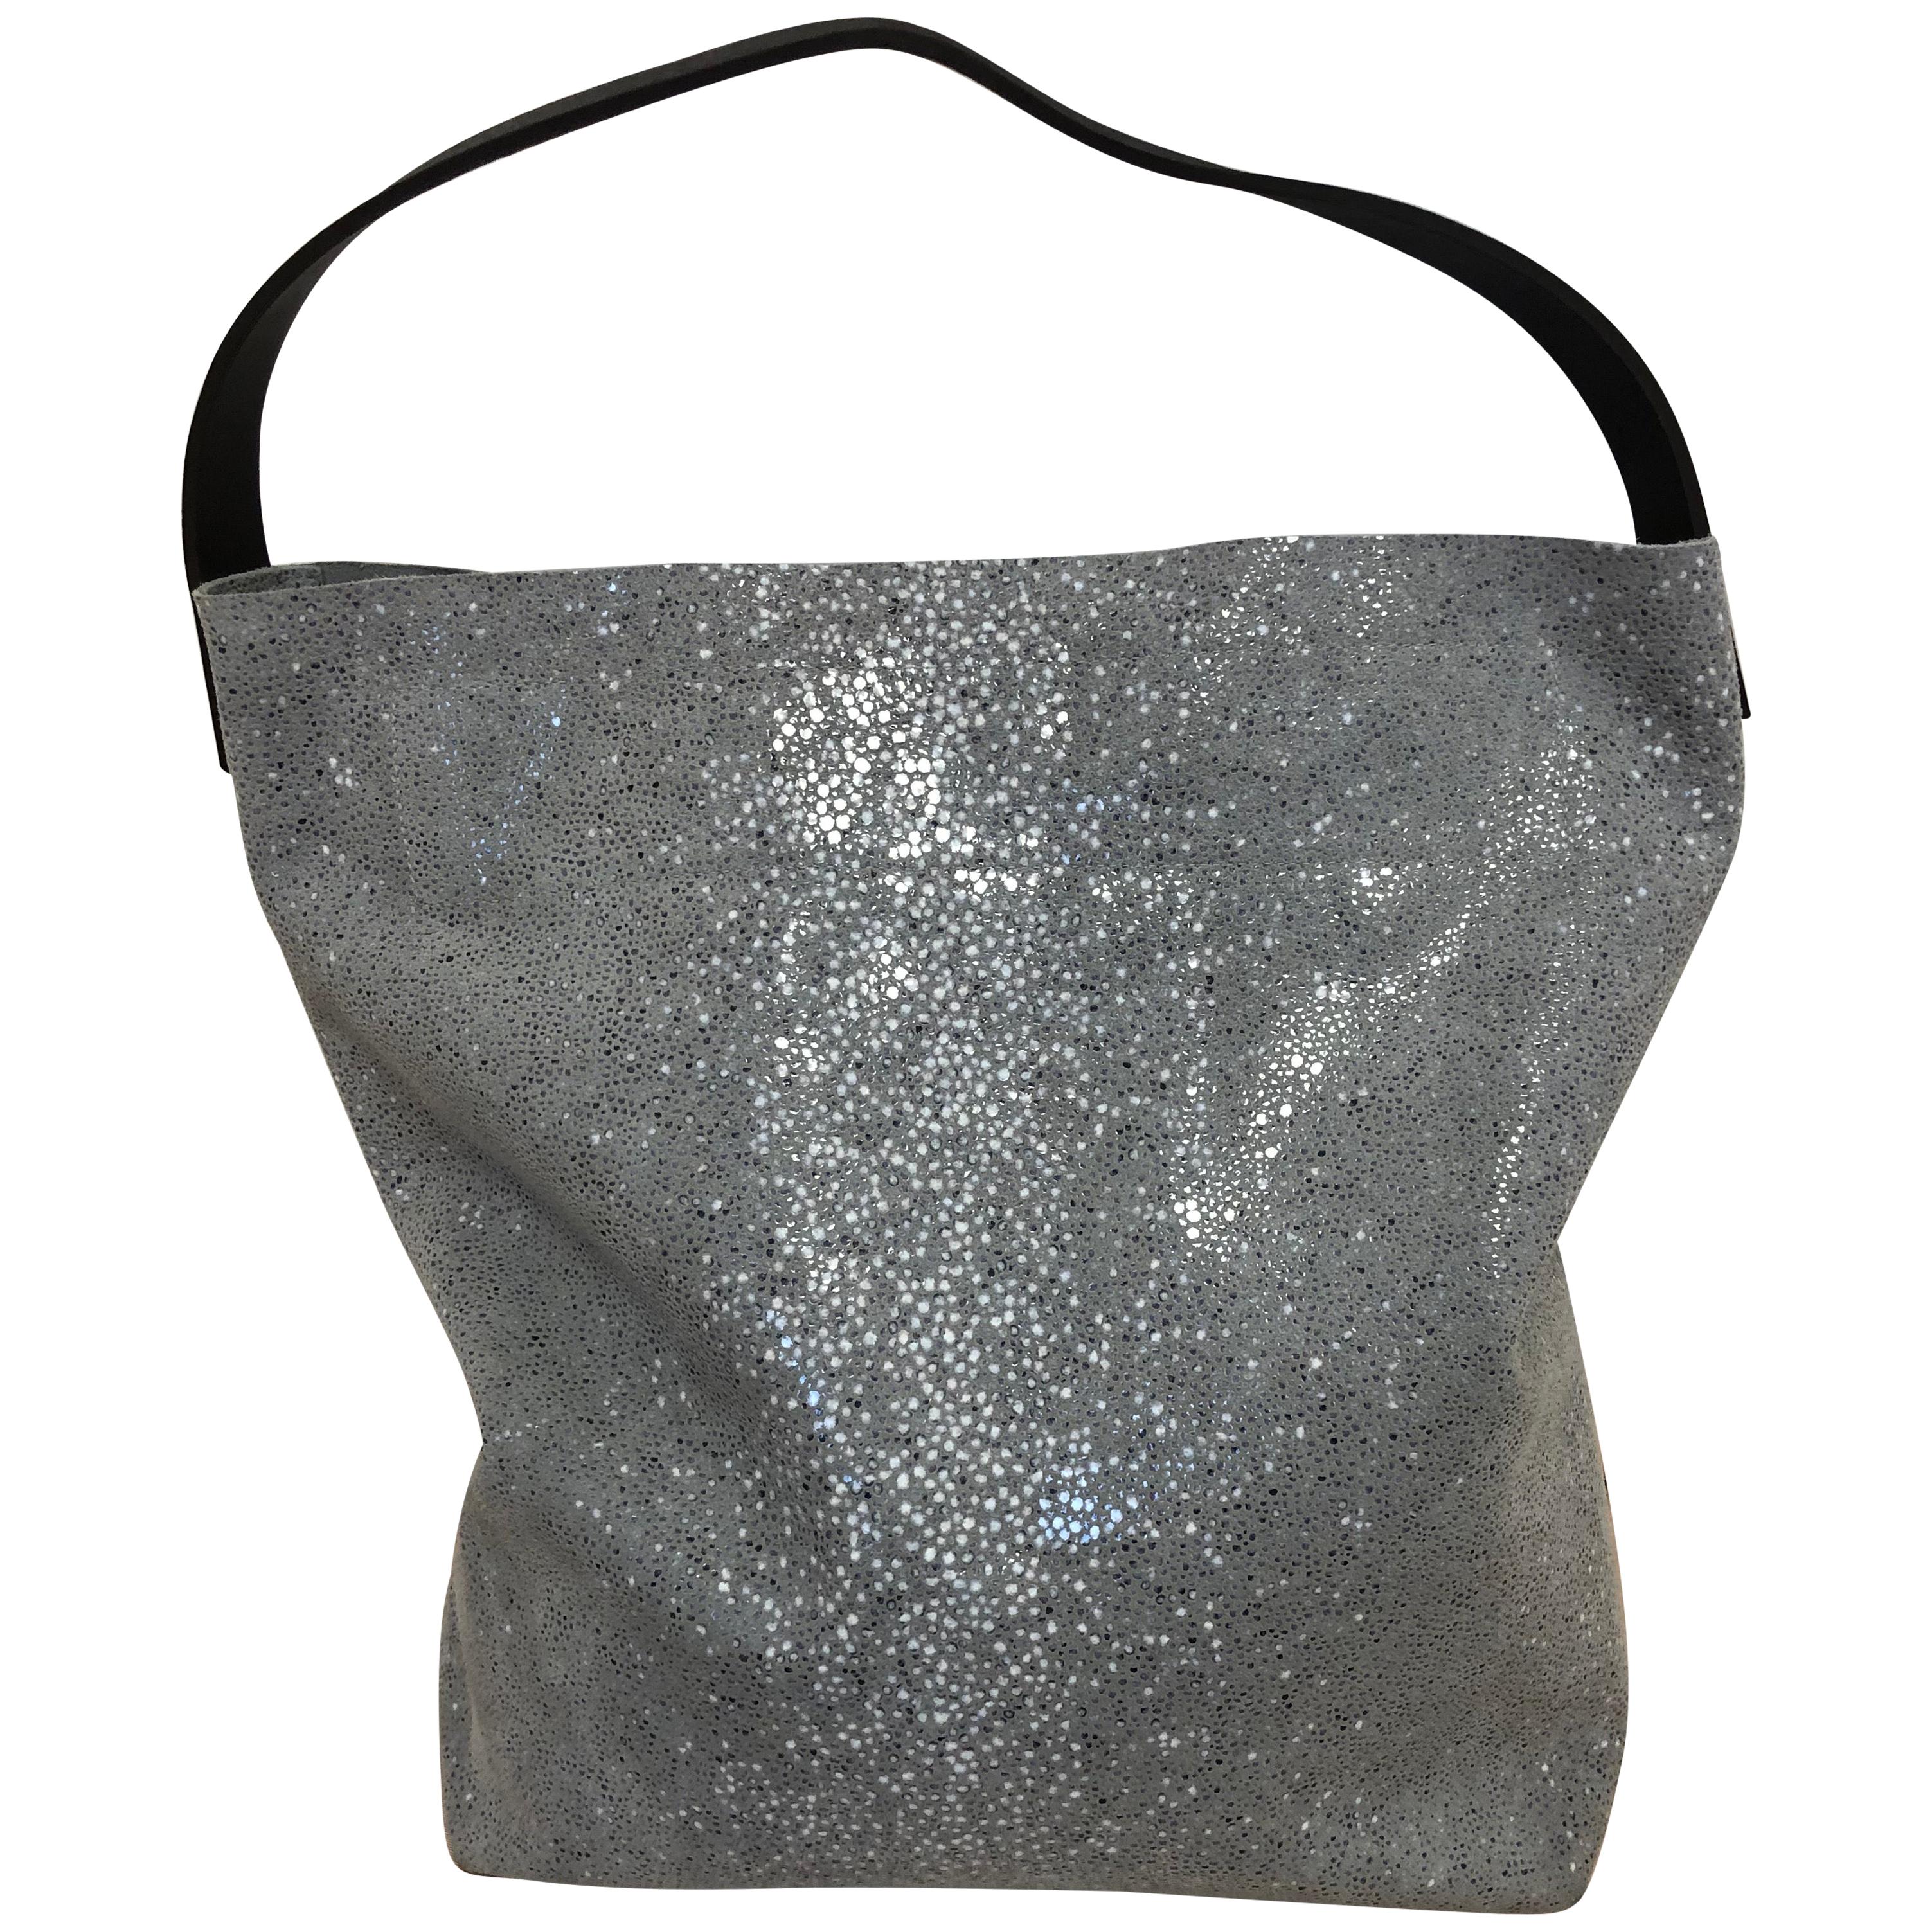 Linde Gallery St Barths Milou Hobo Bag by C and F Linde.  Made in France 